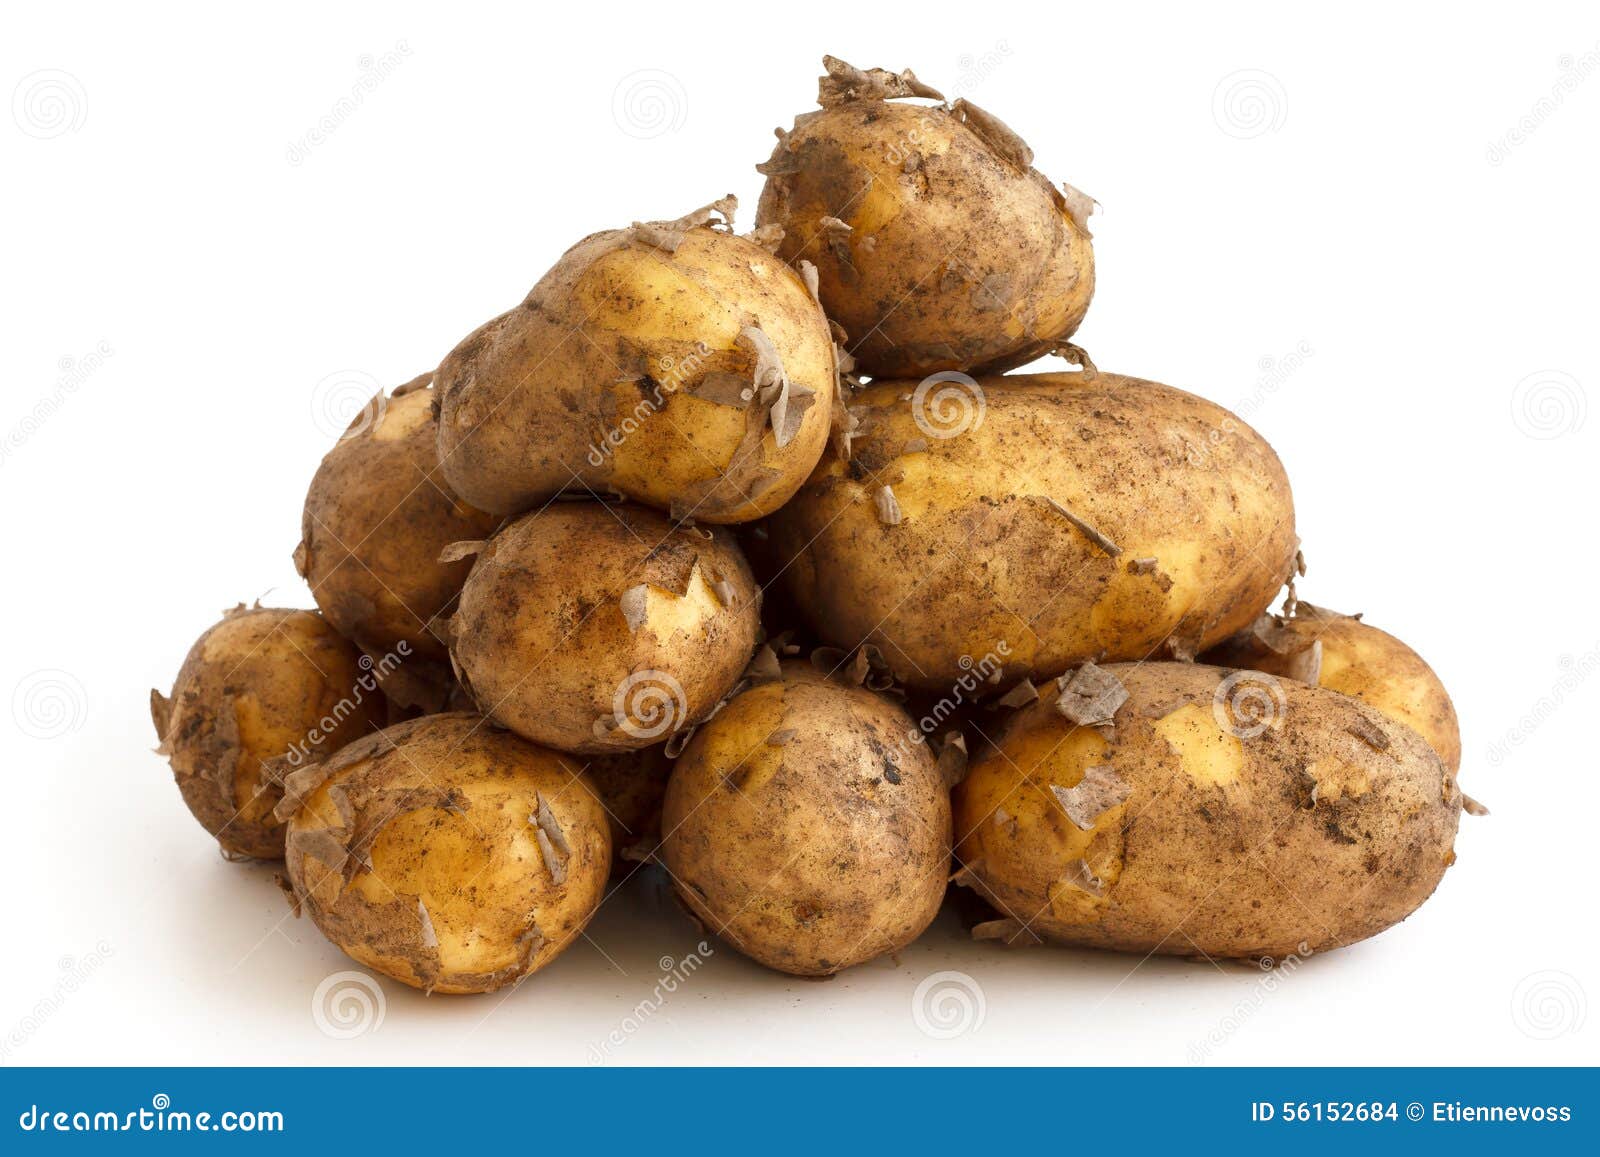 pyramid heap of unwashed new potatoes  on white.